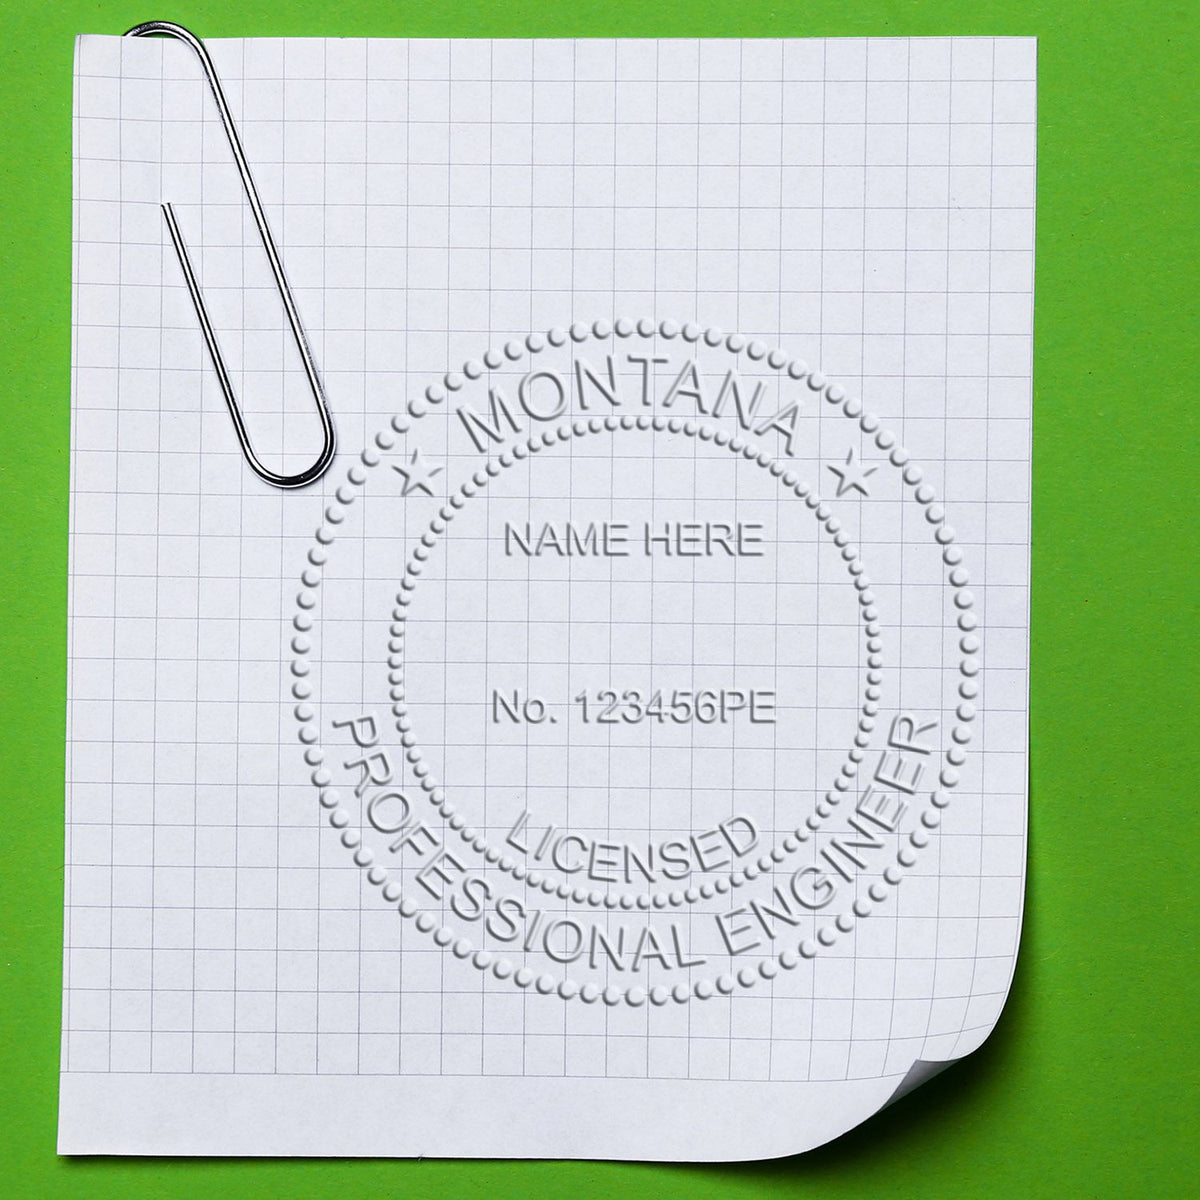 The Gift Montana Engineer Seal stamp impression comes to life with a crisp, detailed image stamped on paper - showcasing true professional quality.